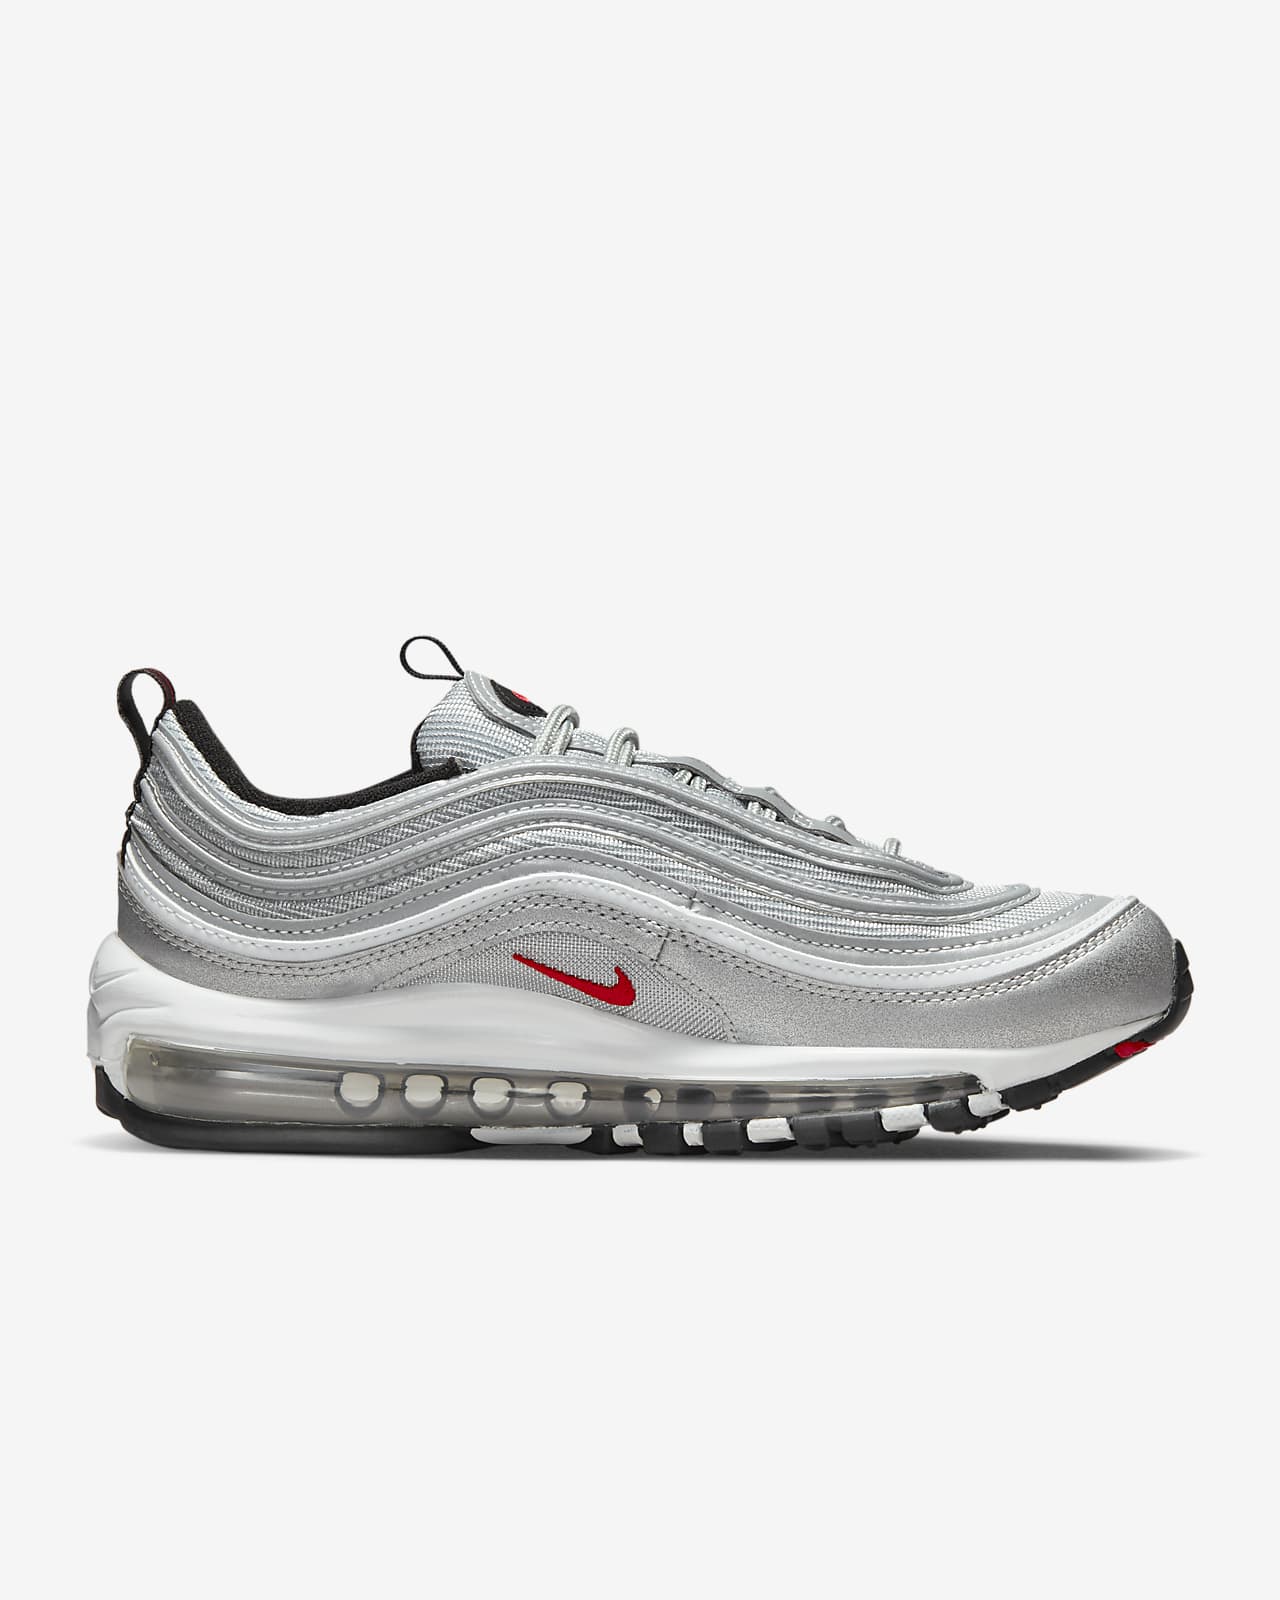 Plasticity wastefully molecule tenis nike air max 97 mujer Persistent passion Finally